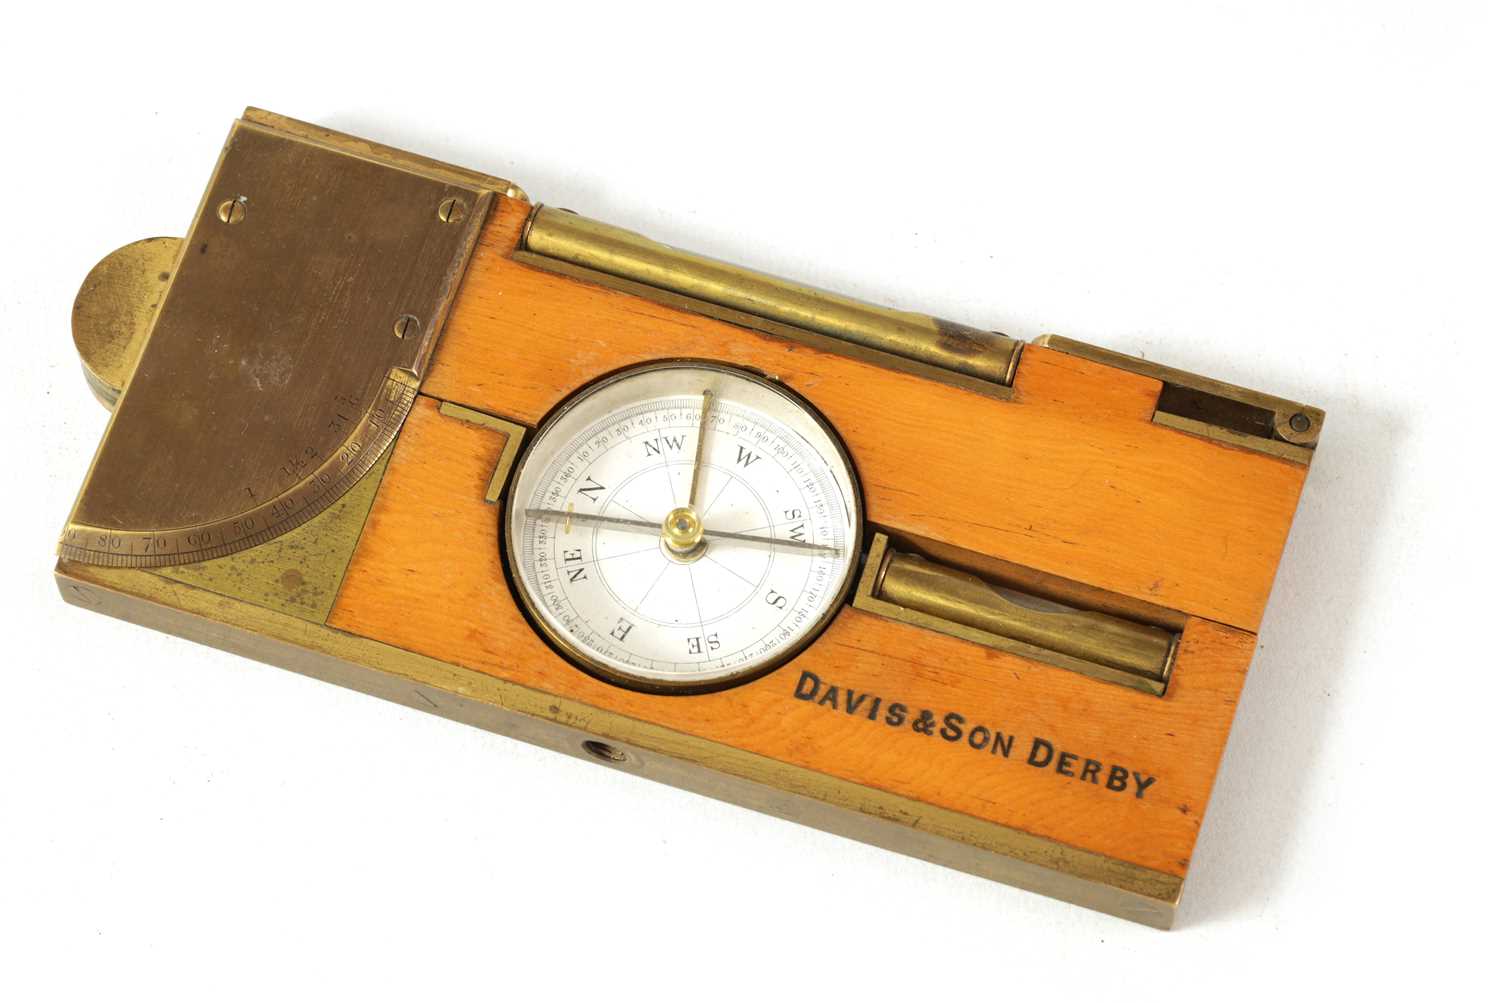 Lot 407 - A GOOD QUALITY LARGE BOXWOOD AND BRASS INCLINOMETER LEVEL BY DAVIS & SON. DERBY